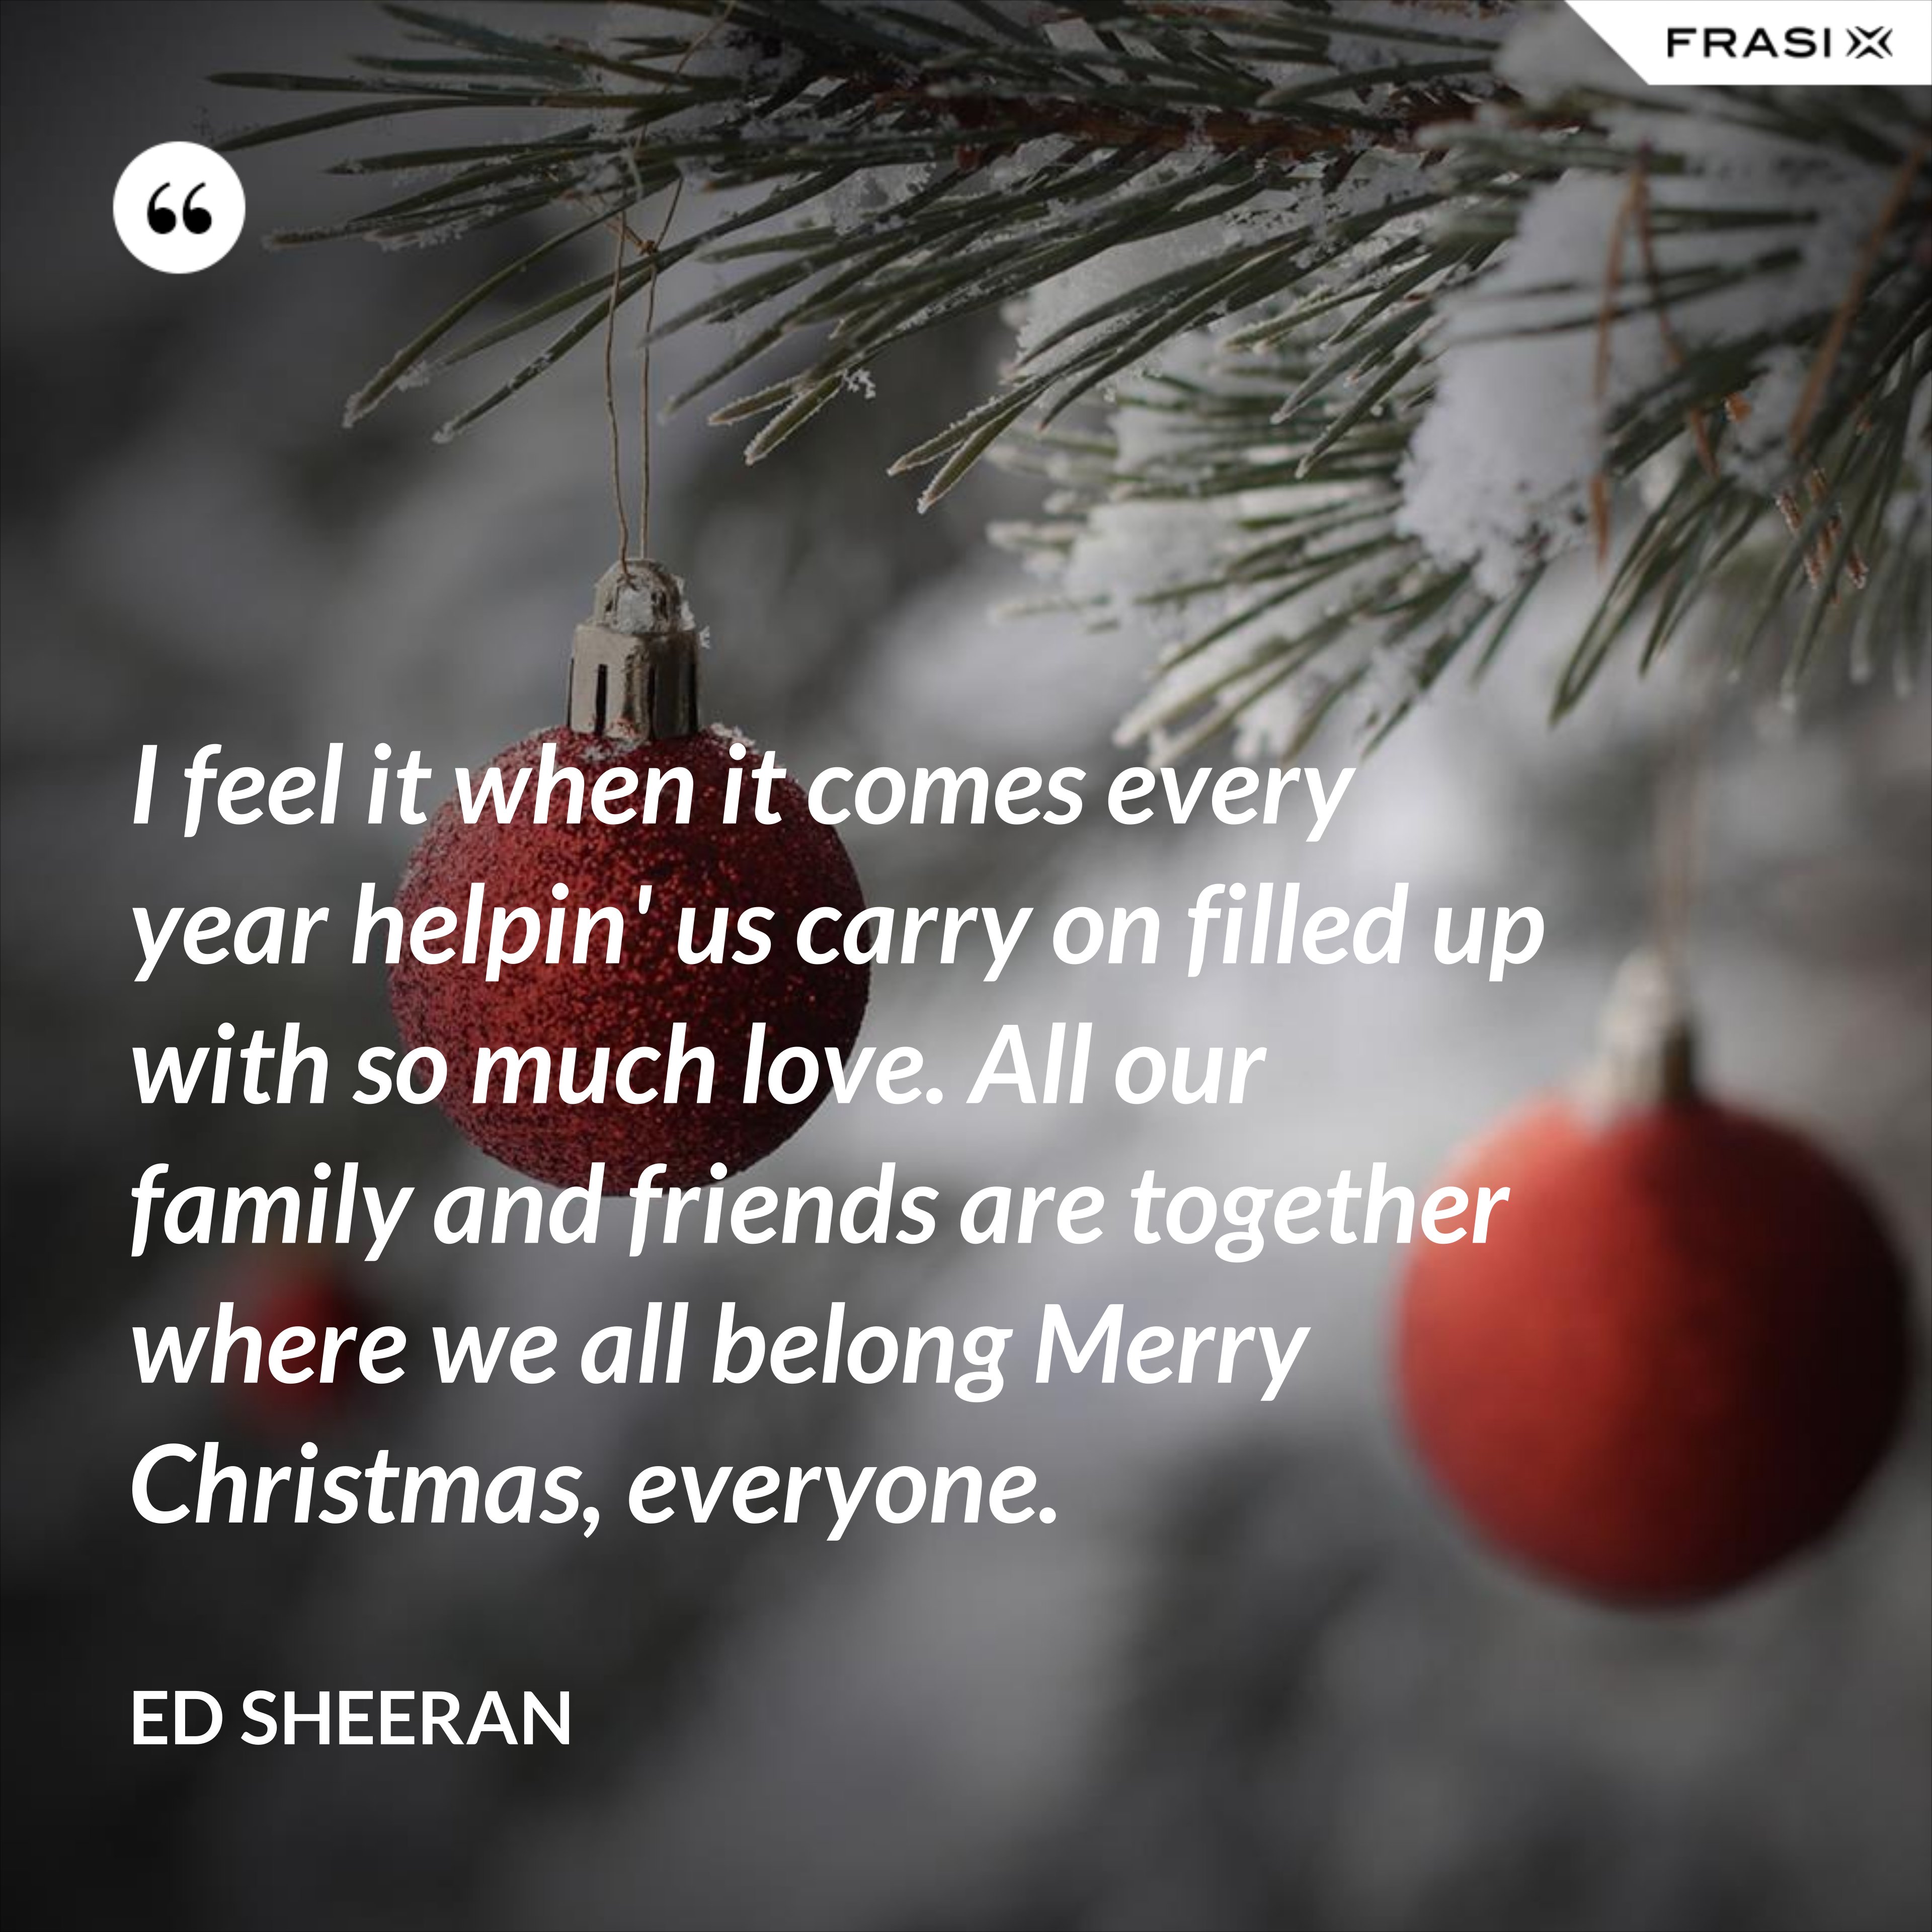 I feel it when it comes every year helpin' us carry on filled up with so much love. All our family and friends are together where we all belong Merry Christmas, everyone. - Ed Sheeran